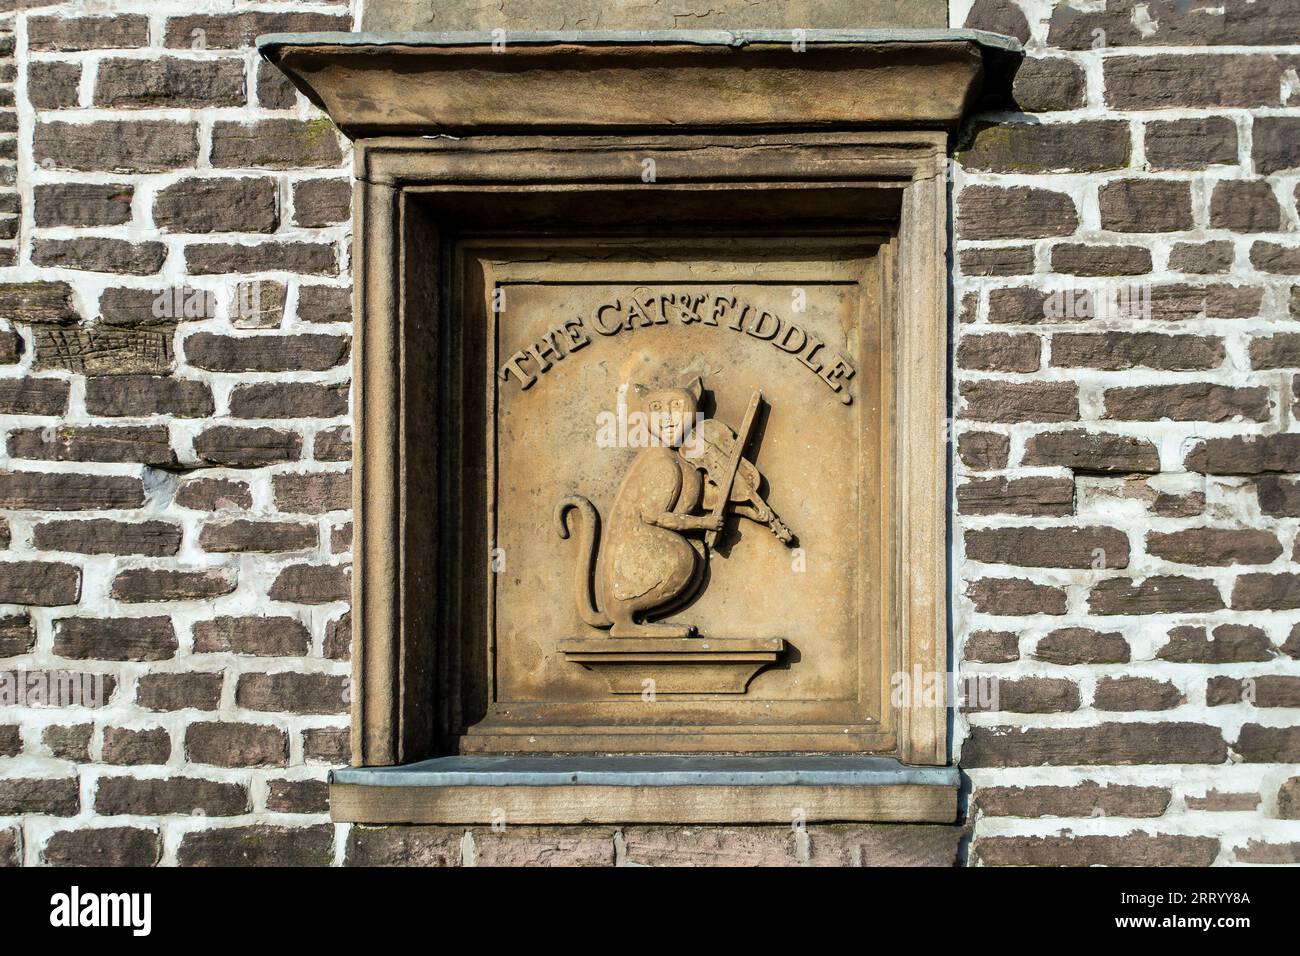 Cat and Fiddle,Distillery,sign,PeakDistrict,Derbyshire,England Stock Photo